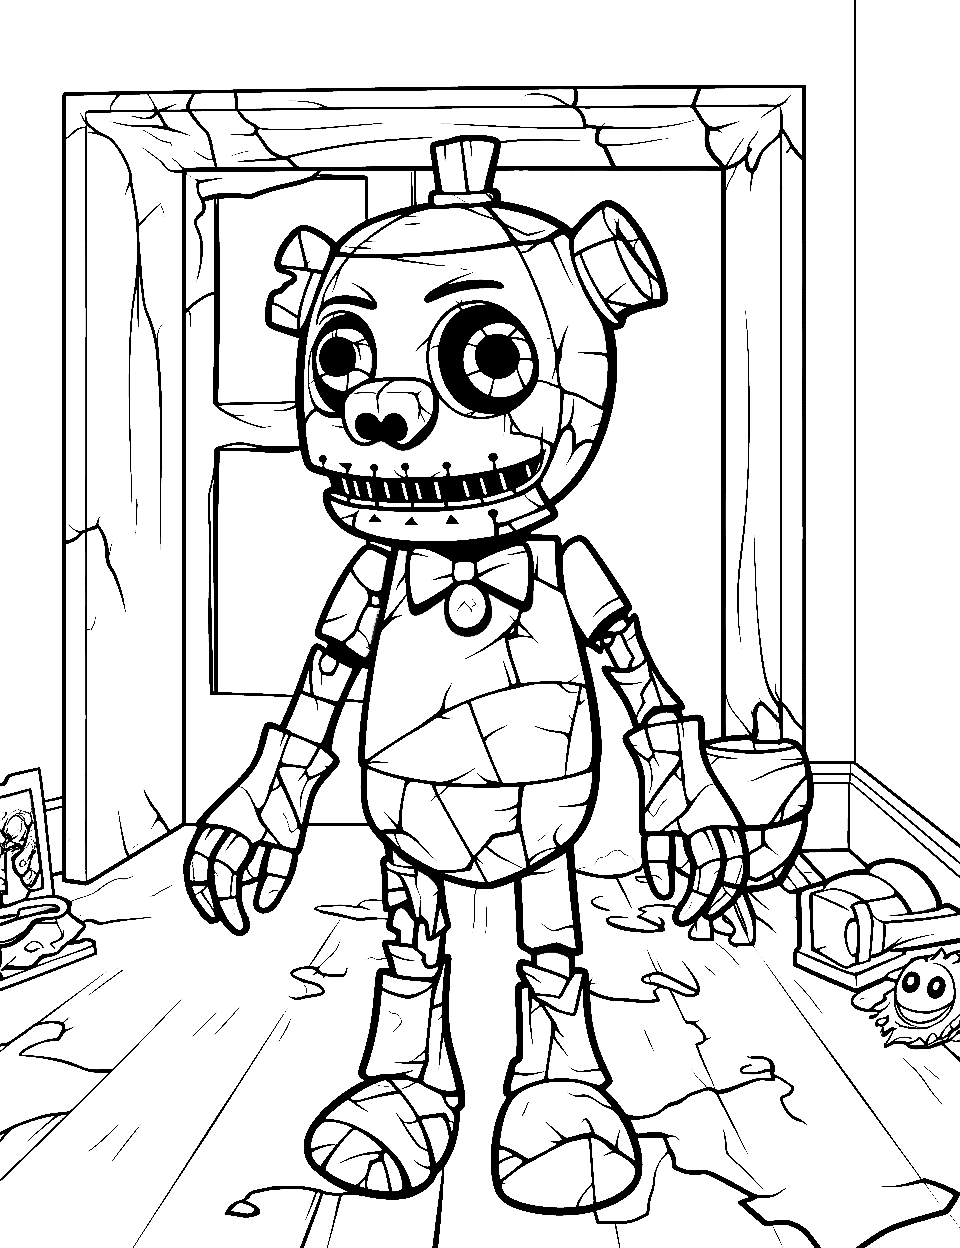 Withered Animatronic Coloring Page - A withered animatronic character looking lost in an abandoned room.